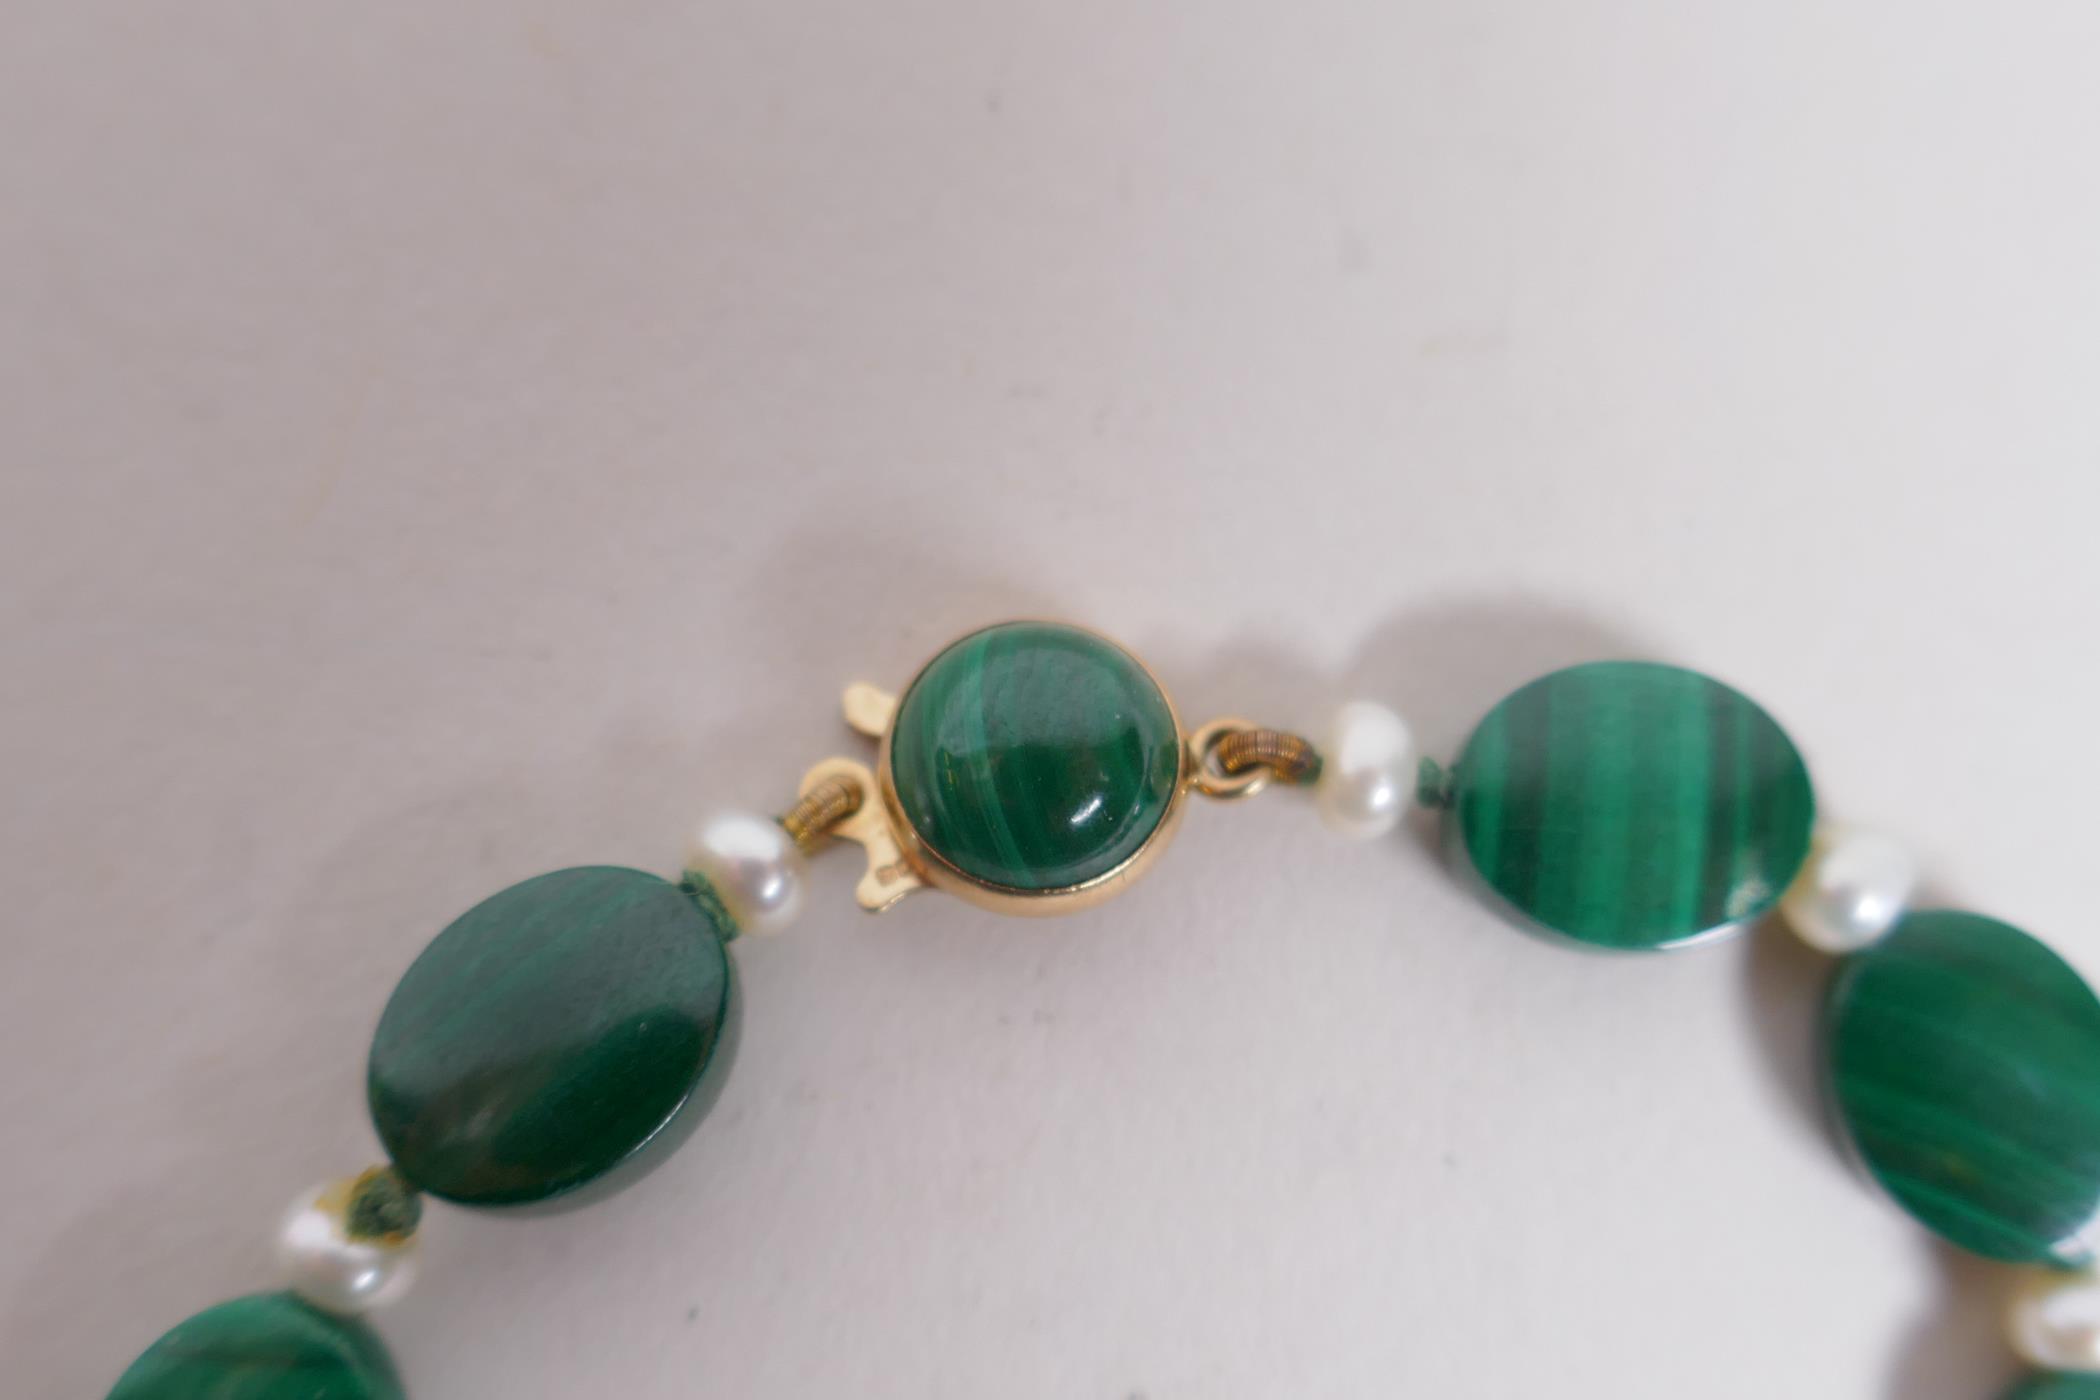 A malachite bead and seed pearl necklace with a 9ct gold clasp, 33cm long - Image 4 of 6